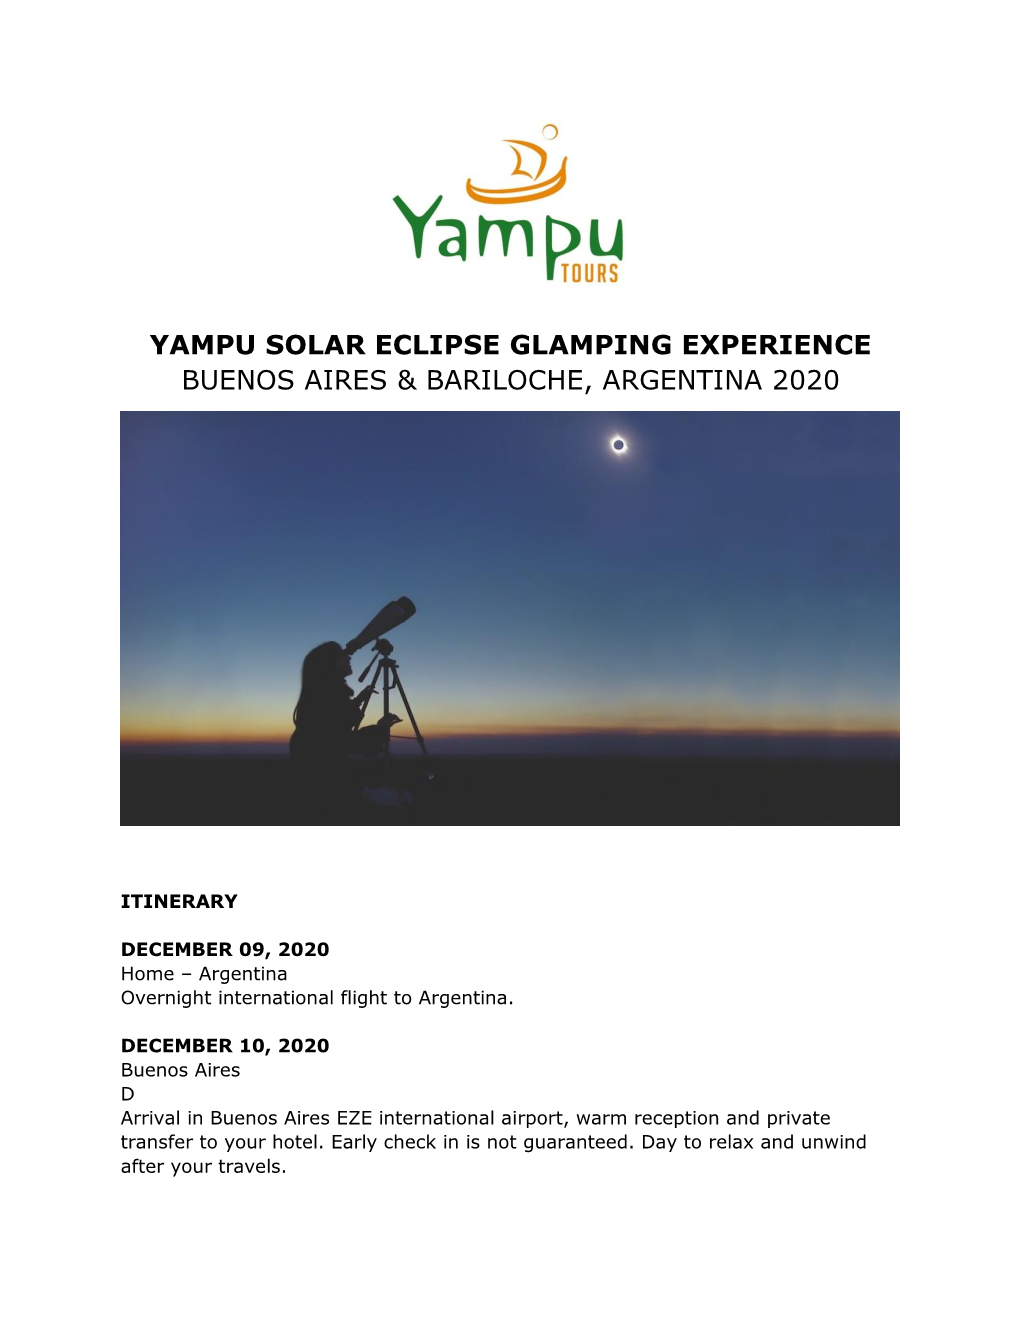 Yampu Solar Eclipse Glamping Experience Buenos Aires & Bariloche, Argentina 2020